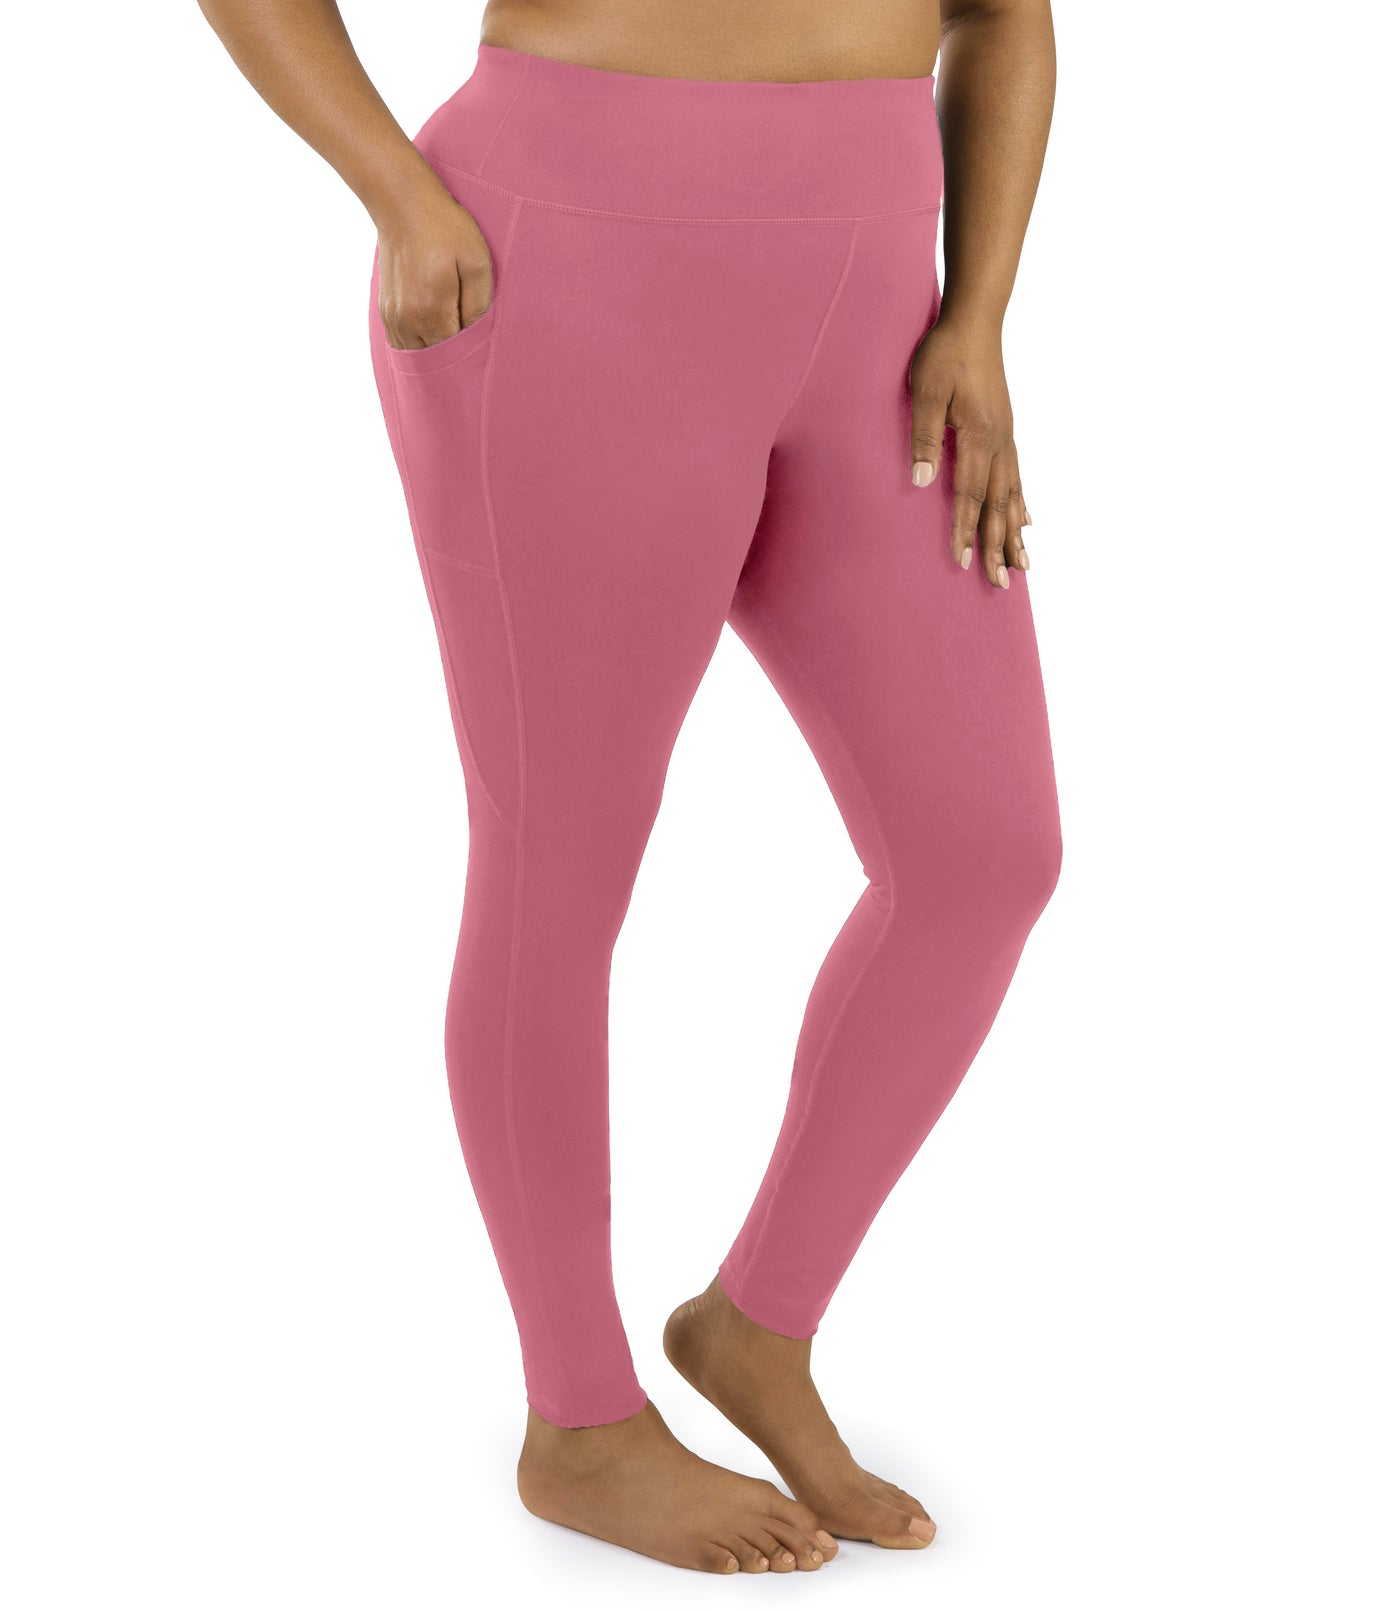 Bottom half of plus sized woman, facing front and angled to side, wearing JunoActive JunoStretch Side Pocket Legging in warm mauve. The pants are full length and have pockets on each side.